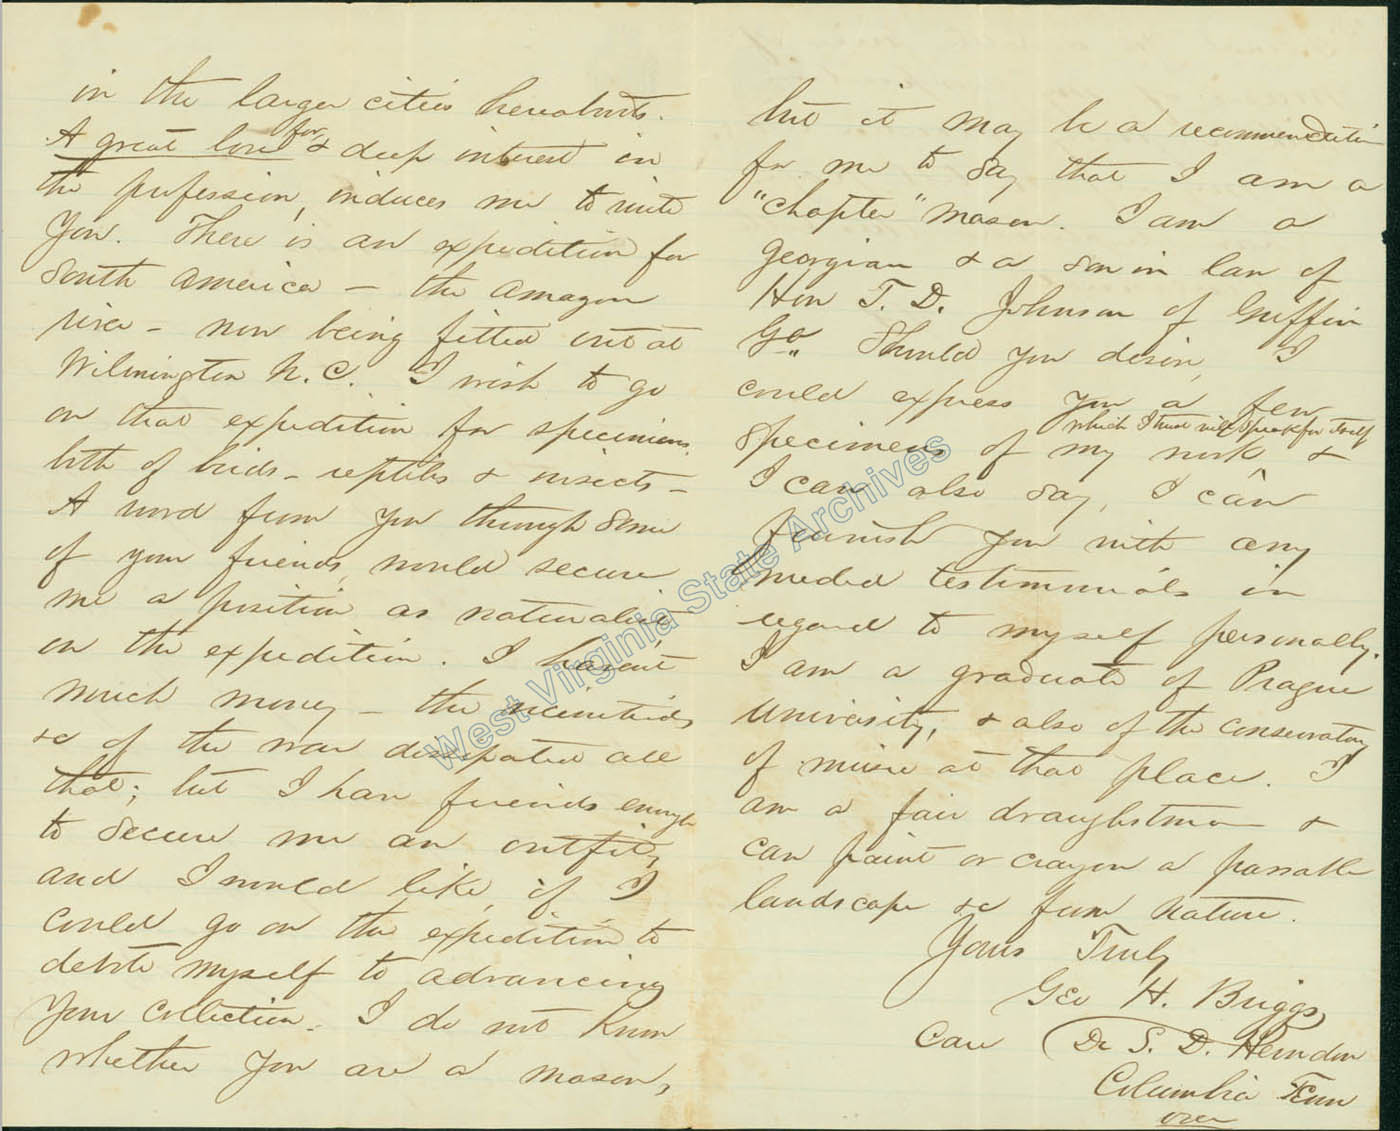 Correspondence from George H. Briggs to William Henry Edwards requesting Edwardss recommendation for a South America expedition, 1869. (Ms79-2)